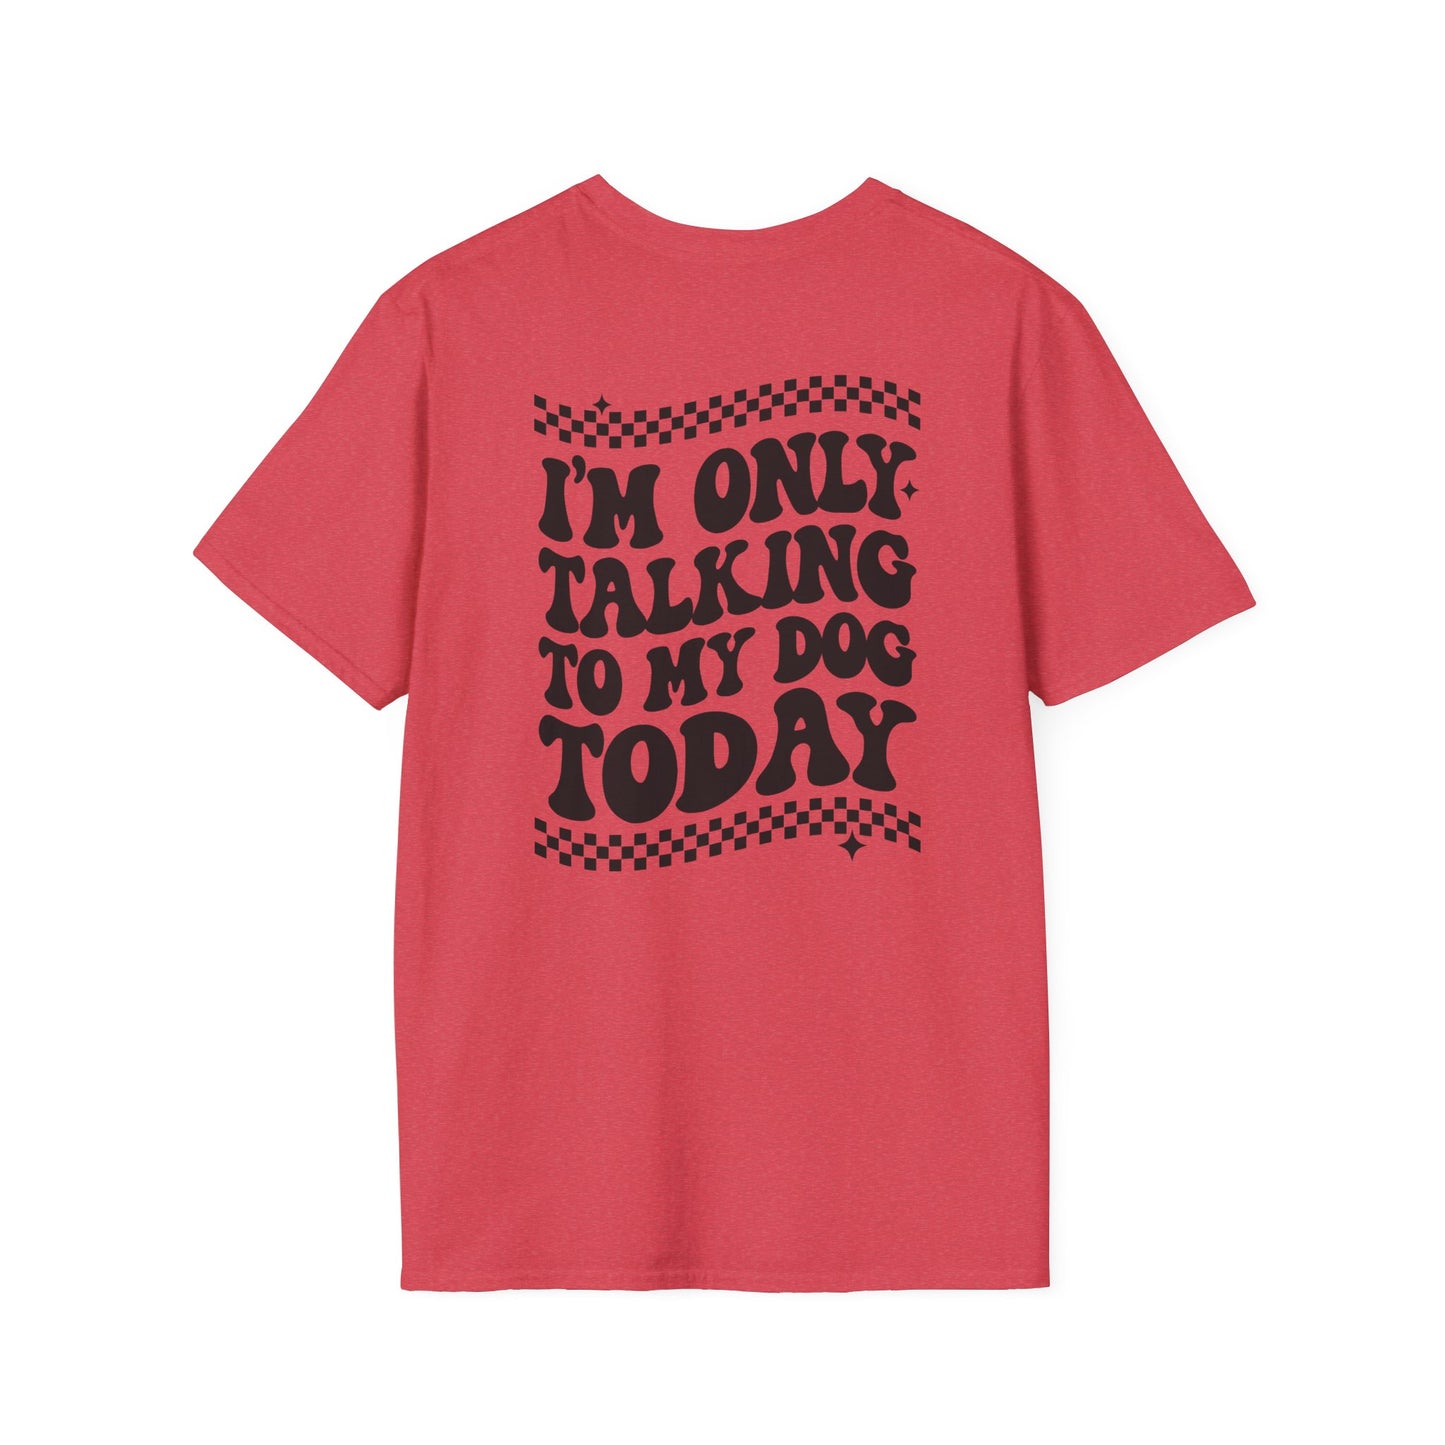 I'm only talking to my CAT - Unisex Softstyle T-Shirt